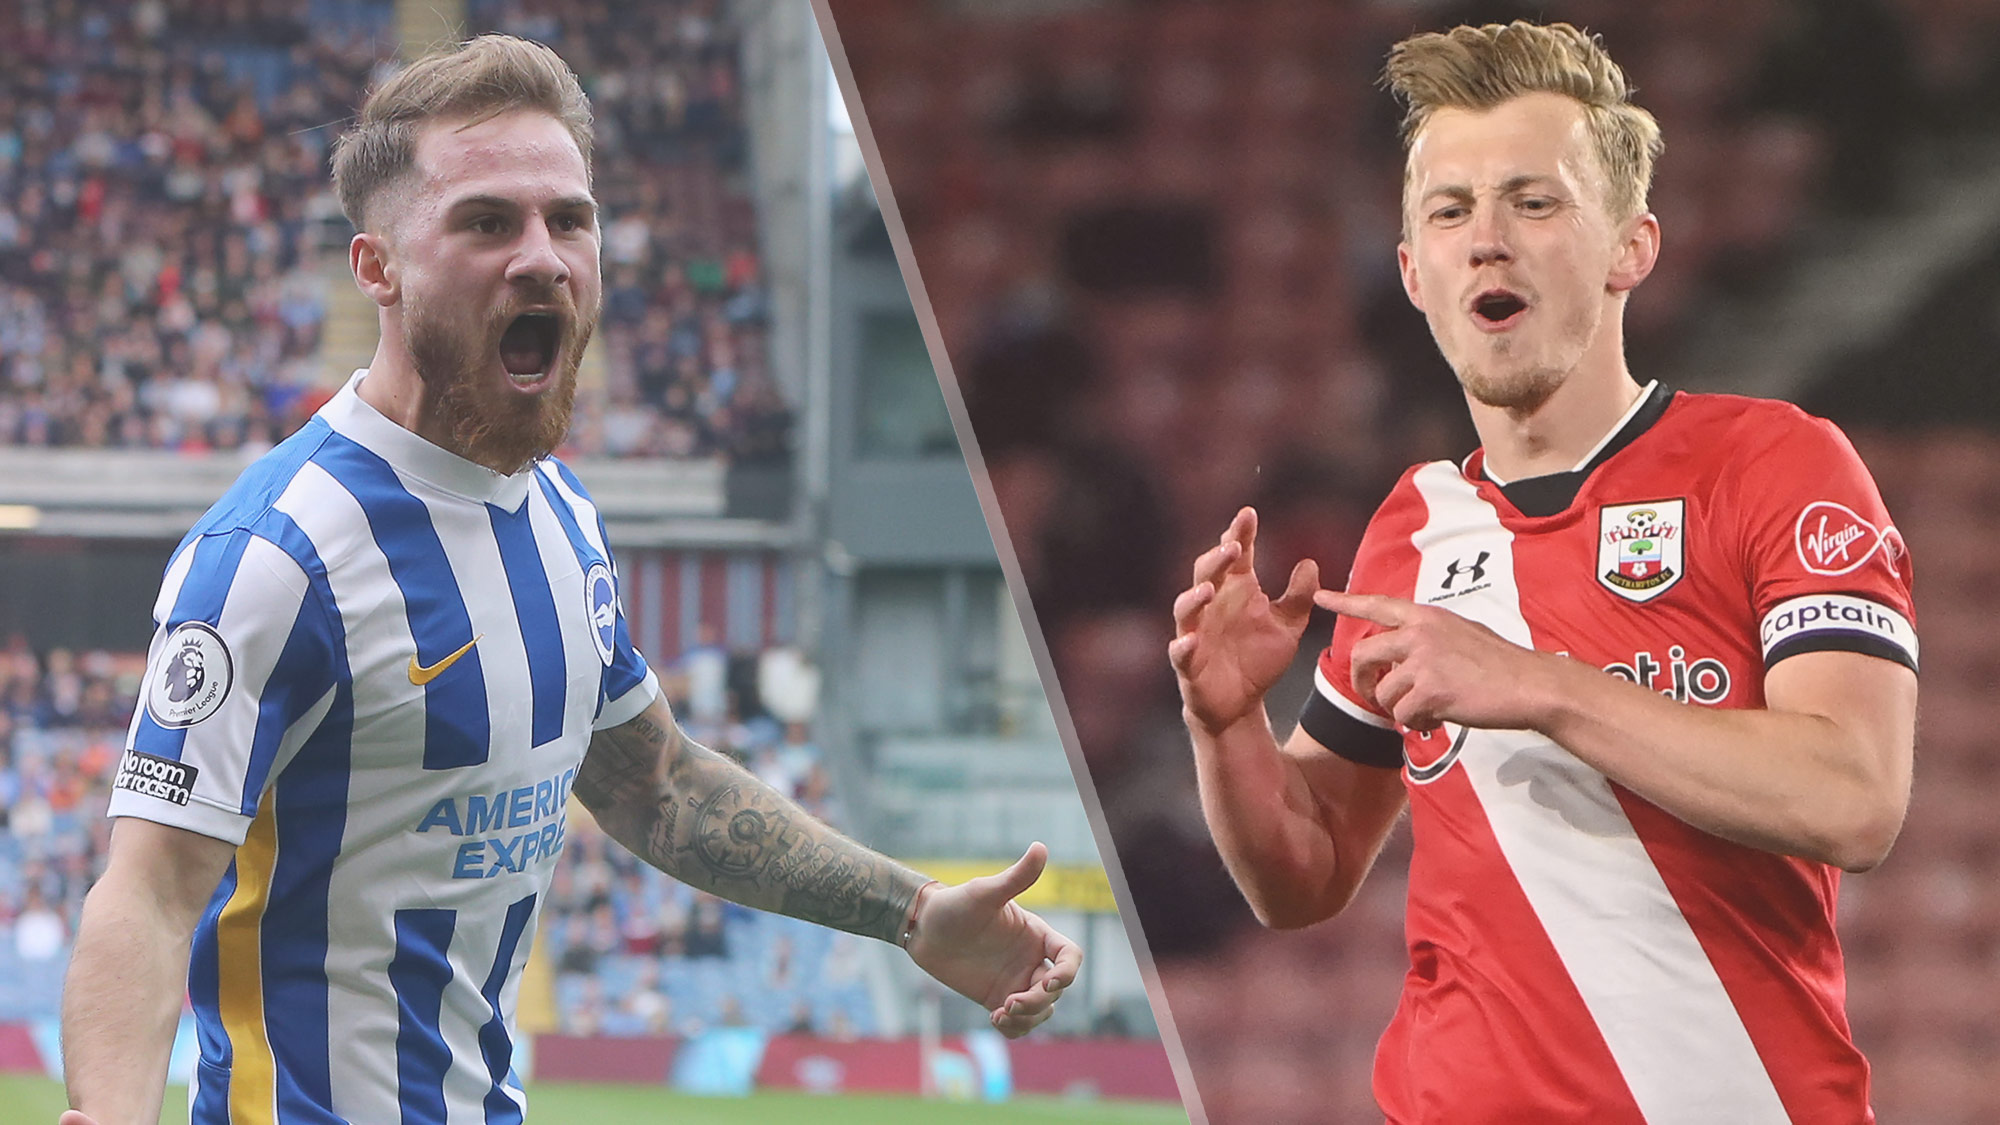 Brighton's Alexis Mac Allister and Southampton's James Ward-Prowse can both be featured in the Brighton vs Southampton live stream.